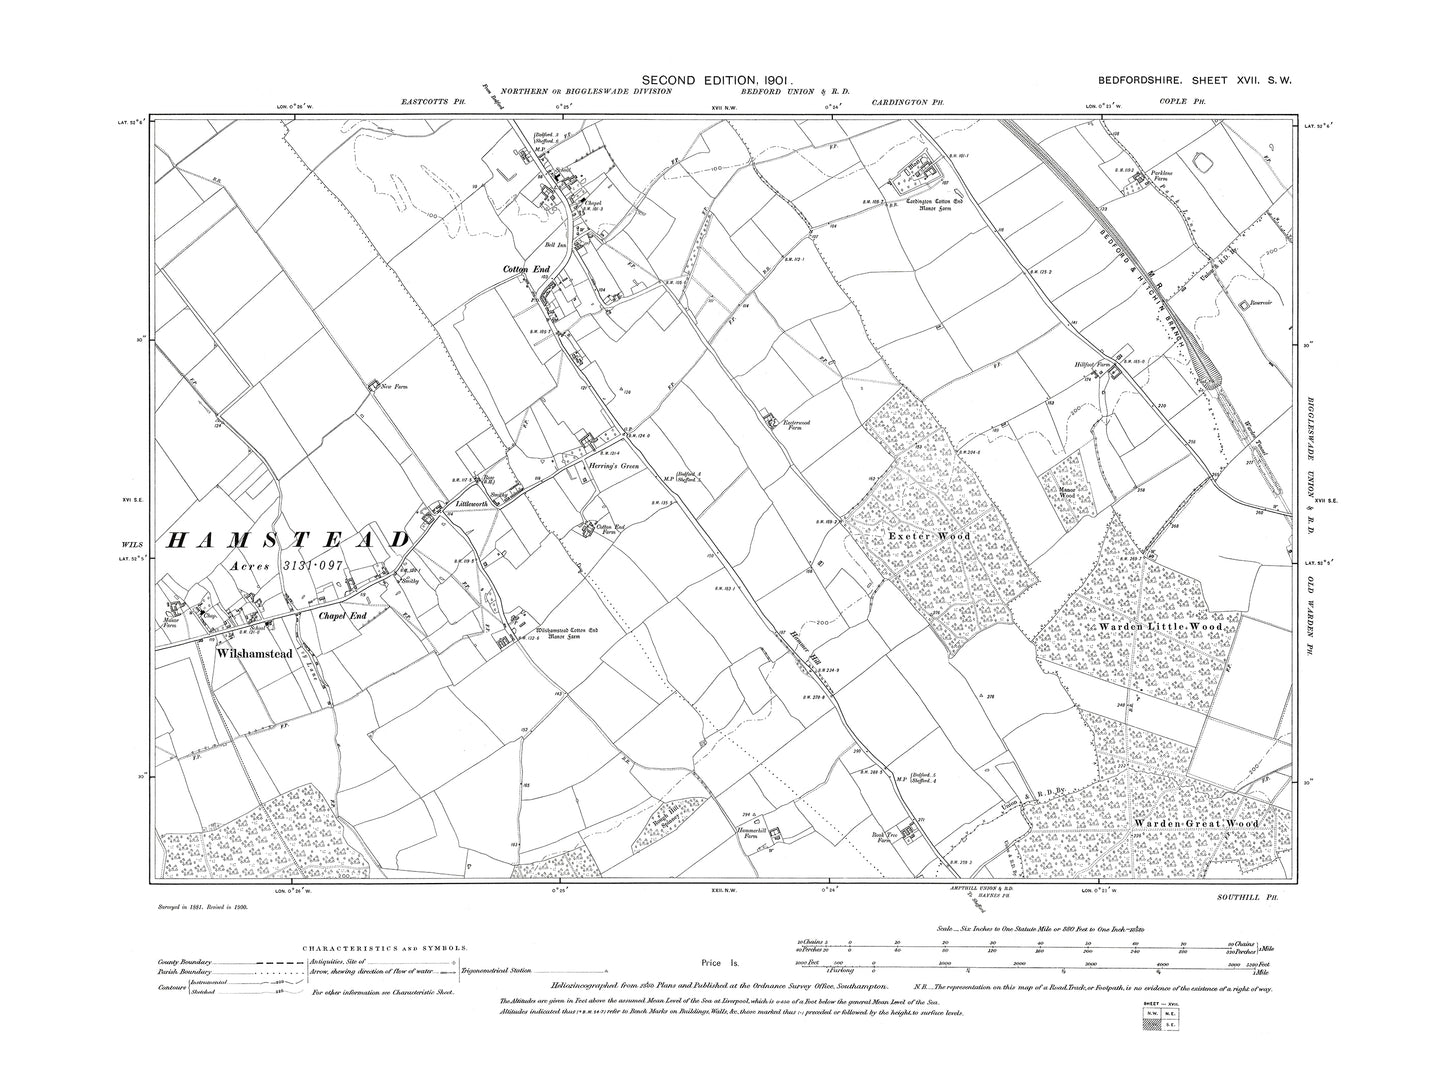 A 1901 map showing Wilshamstead and Cotton End in Bedfordshire - A Digital Download 0f OS 1:10560 scale map, Beds 17SW